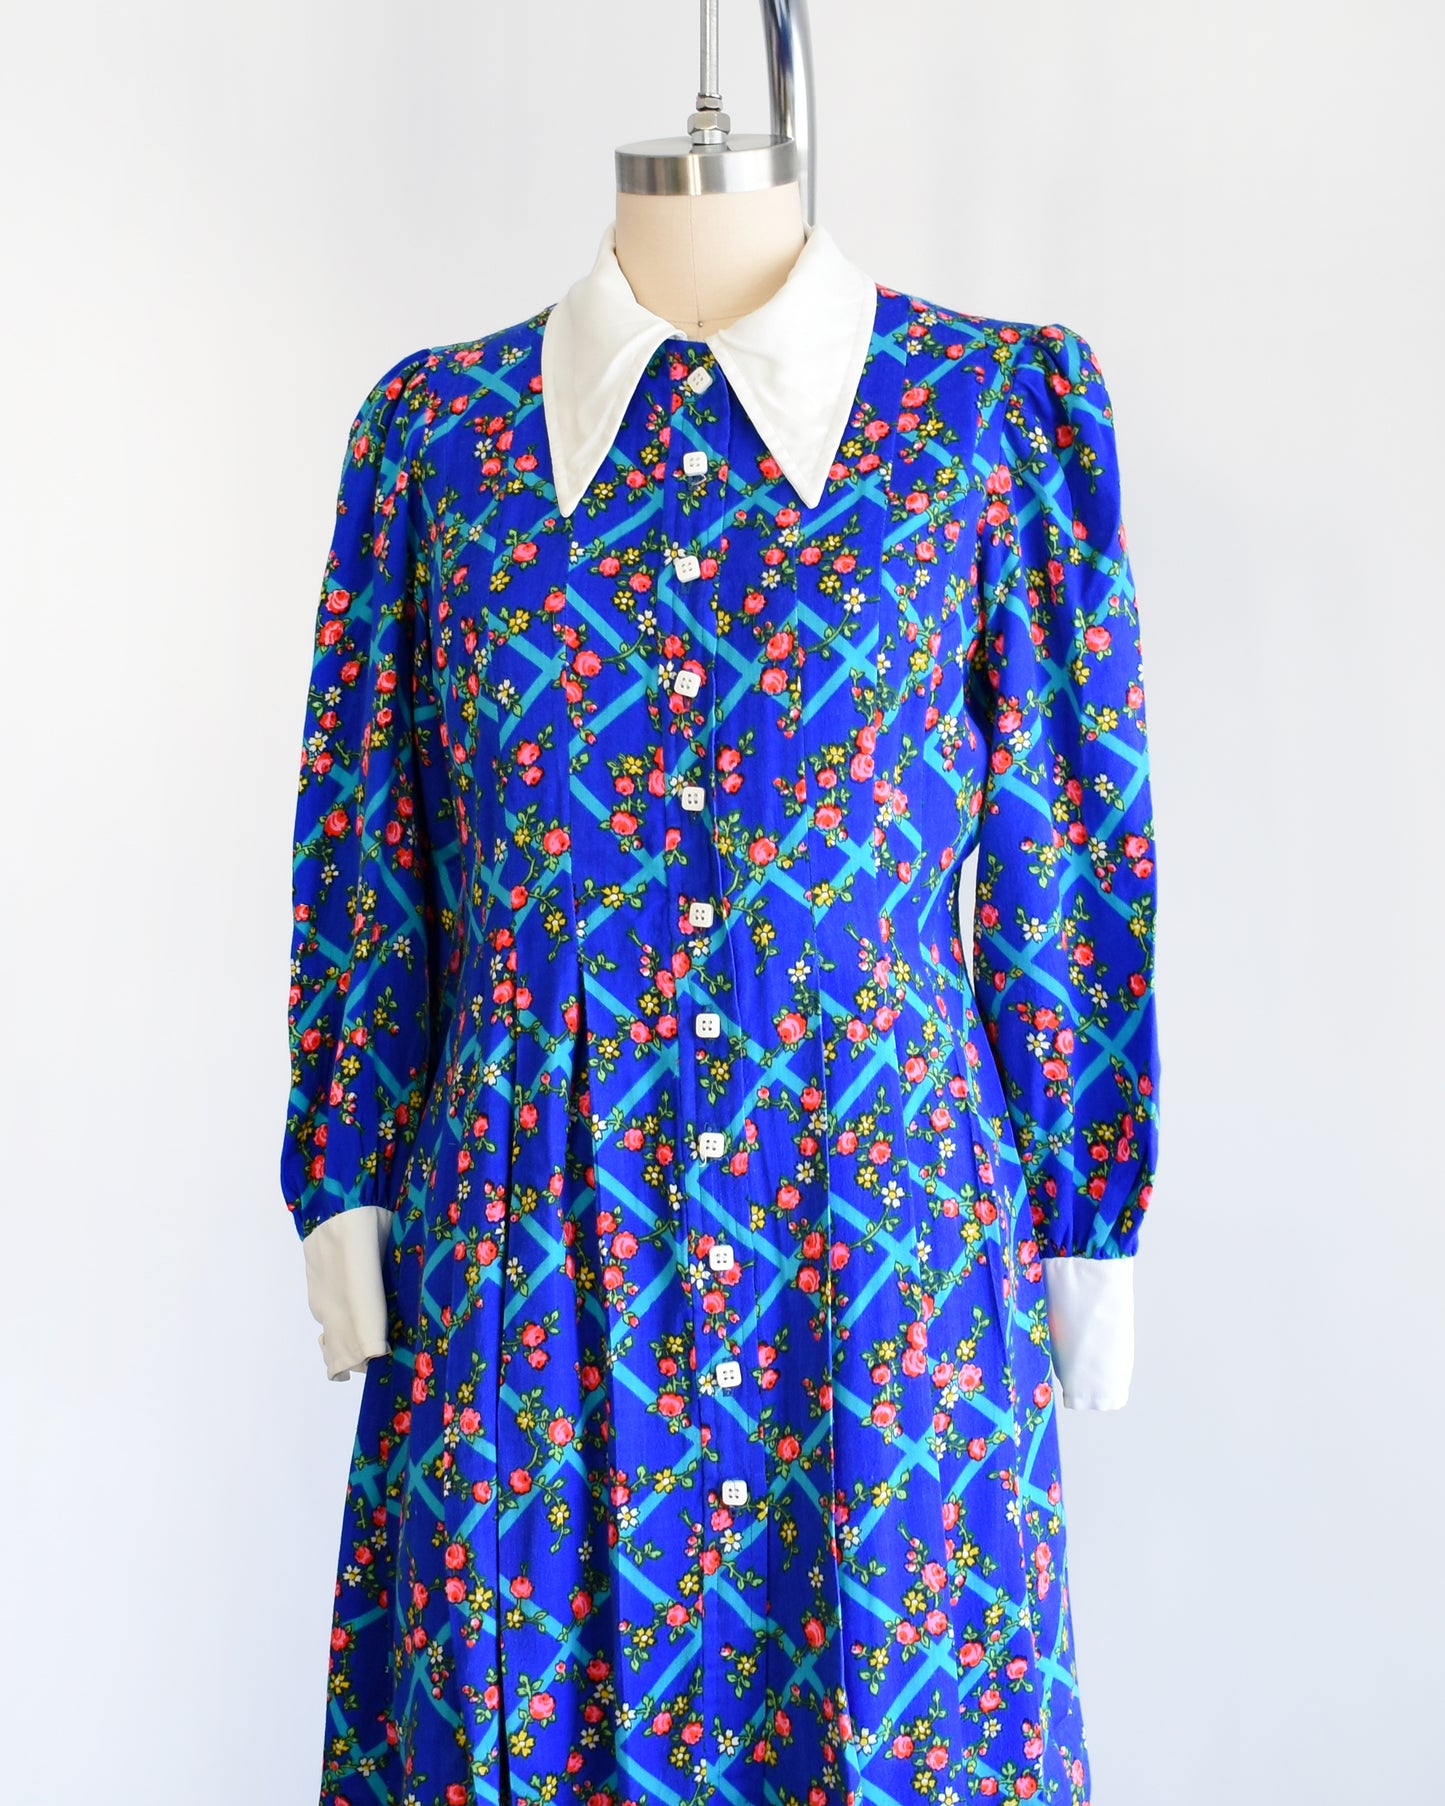 Side front view of a vintage 1970s blue floral mini dress that has a white collar with matching cuffs, and white buttons down the front.